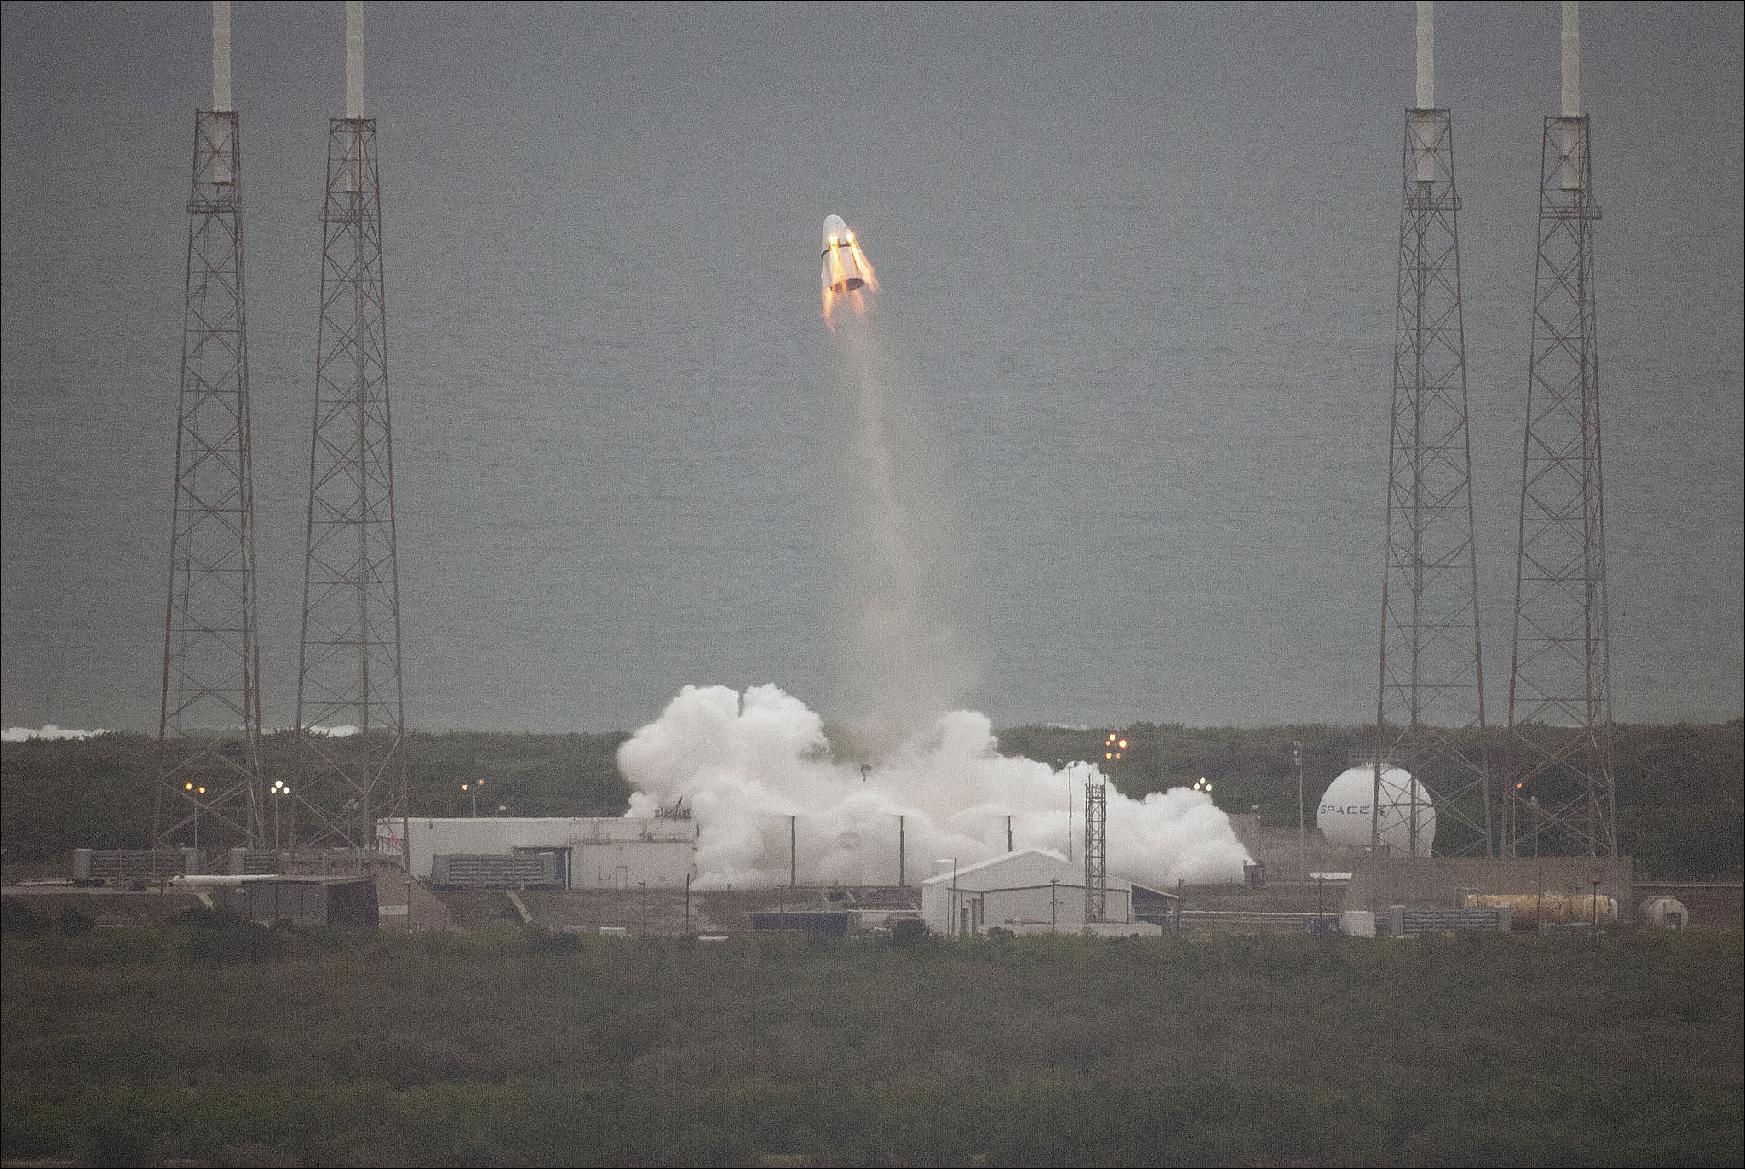 Figure 30: Photo of the SpaceX Pad Abort Test with the Crew Dragon shortly after launch (image credit: NASA, Universe Today)